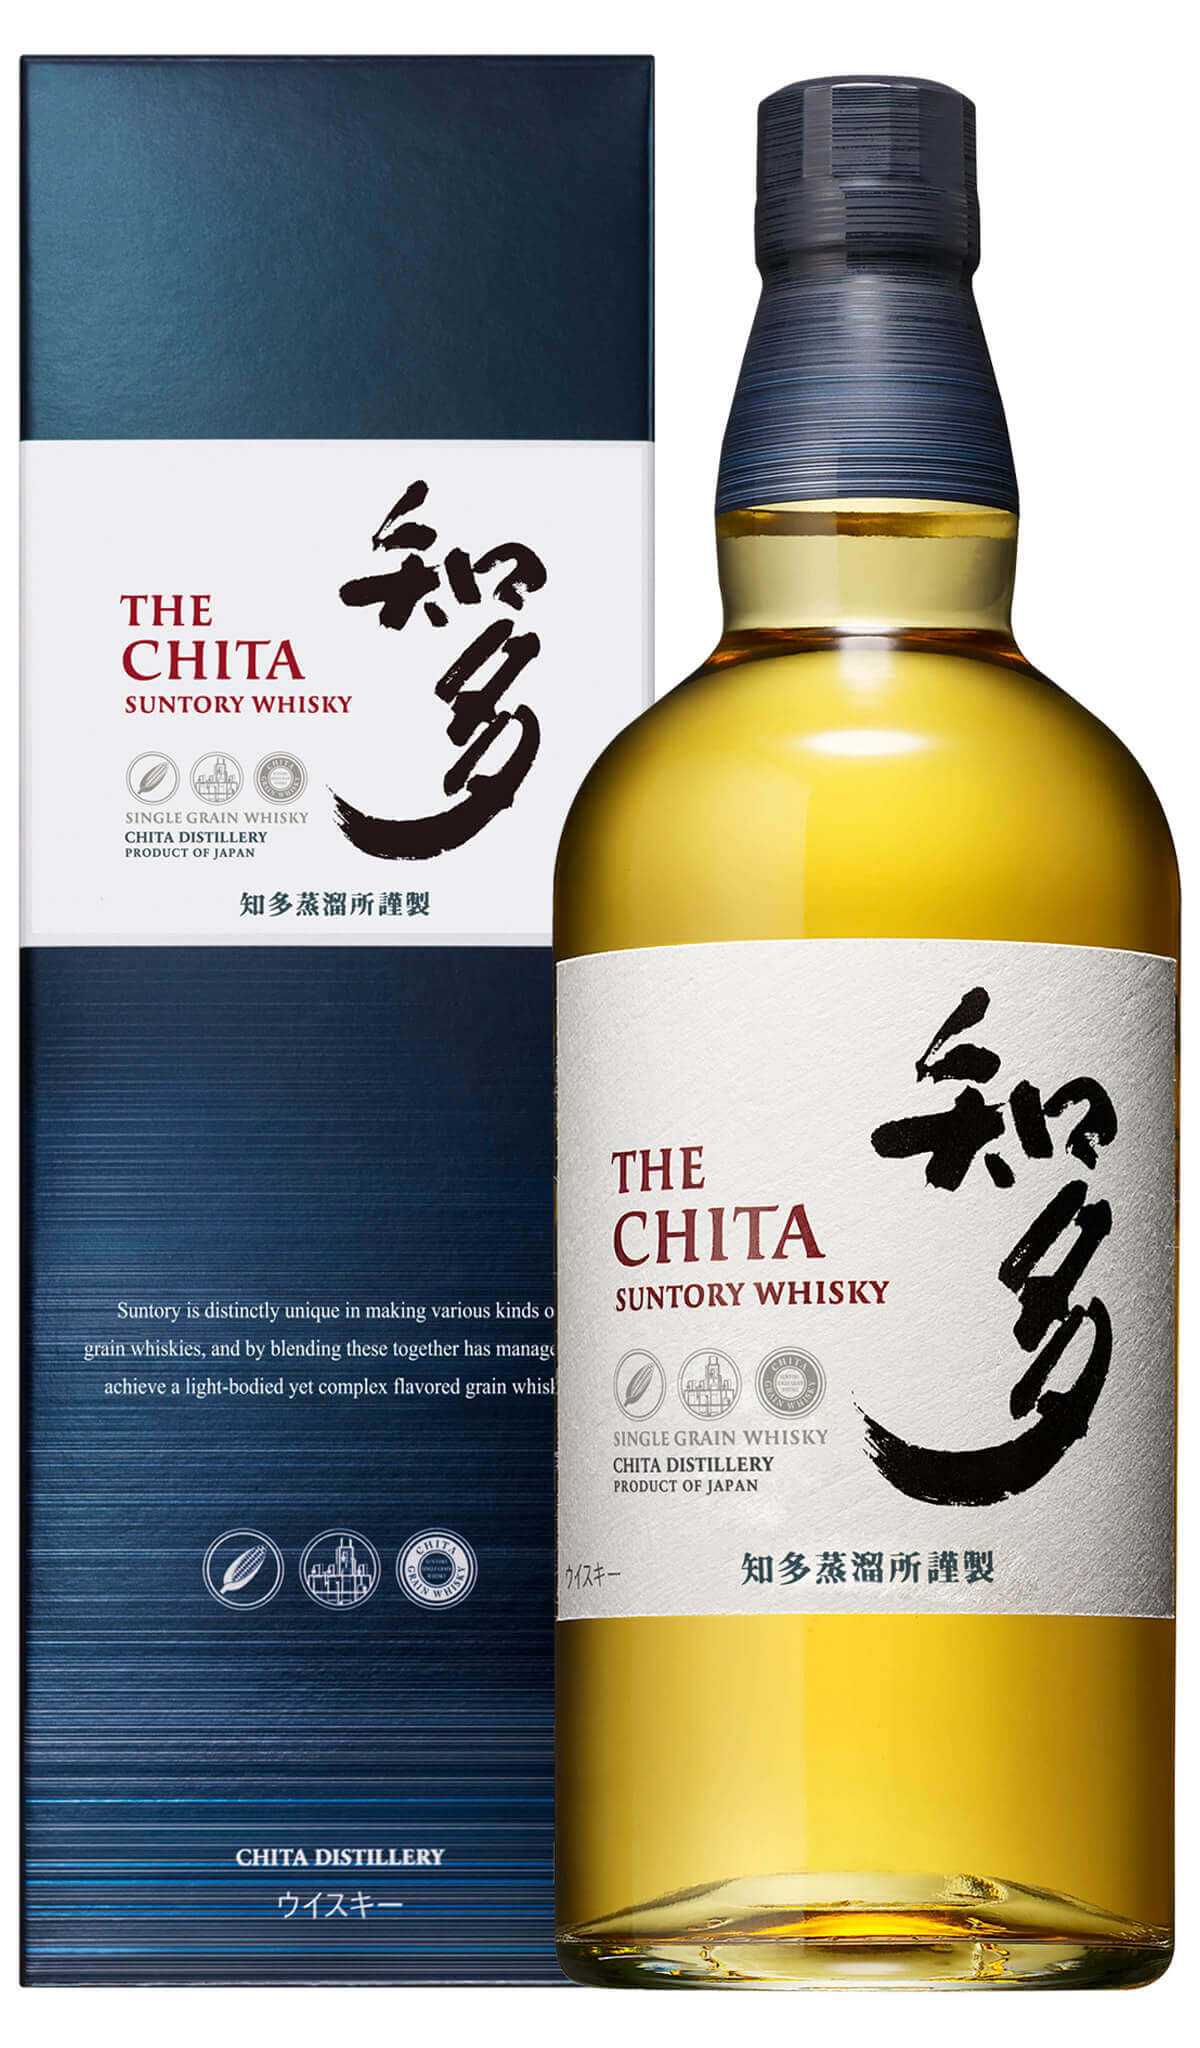 Find out more or buy Suntory The Chita Japanese Whisky 700ml (Single Grain) online at Wine Sellers Direct - Australia’s independent liquor specialists.